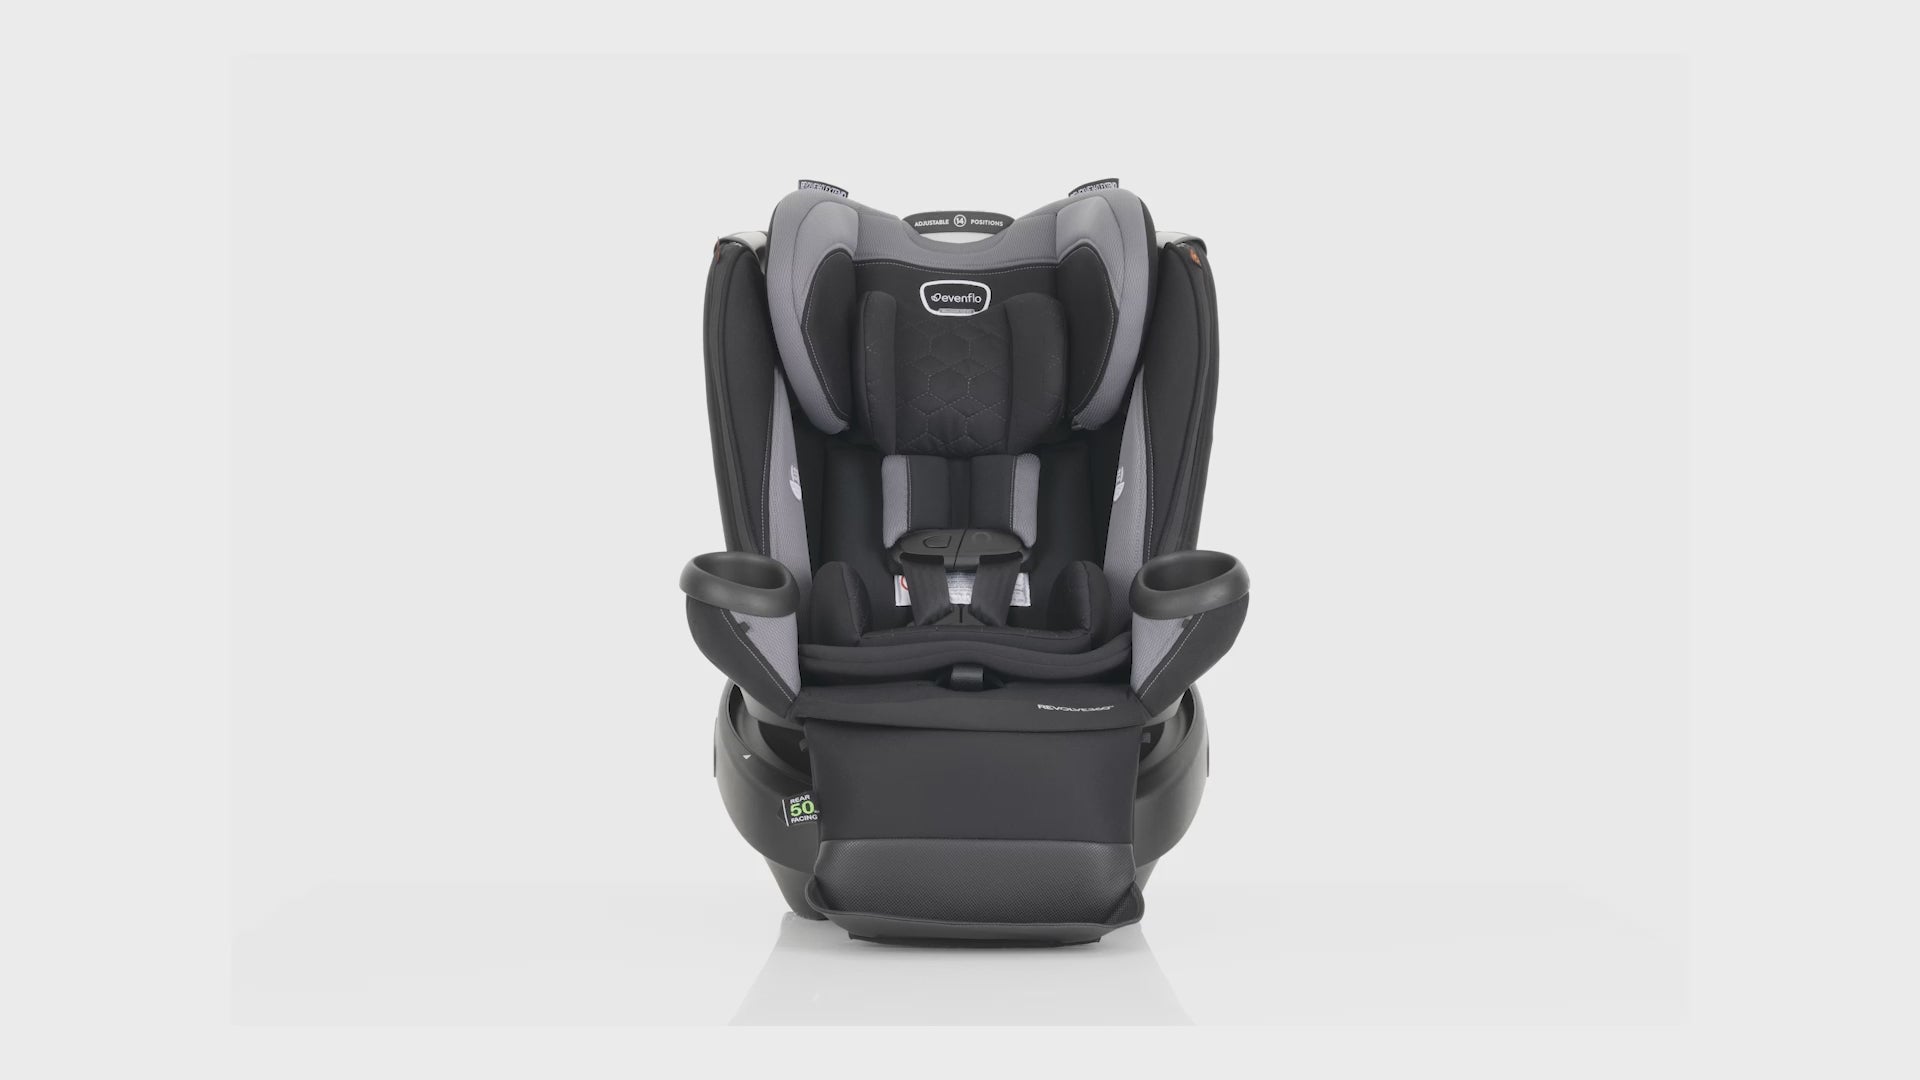 Load video: Video of Revolve 360 Extend Car Seat rotating in 360 degrees.